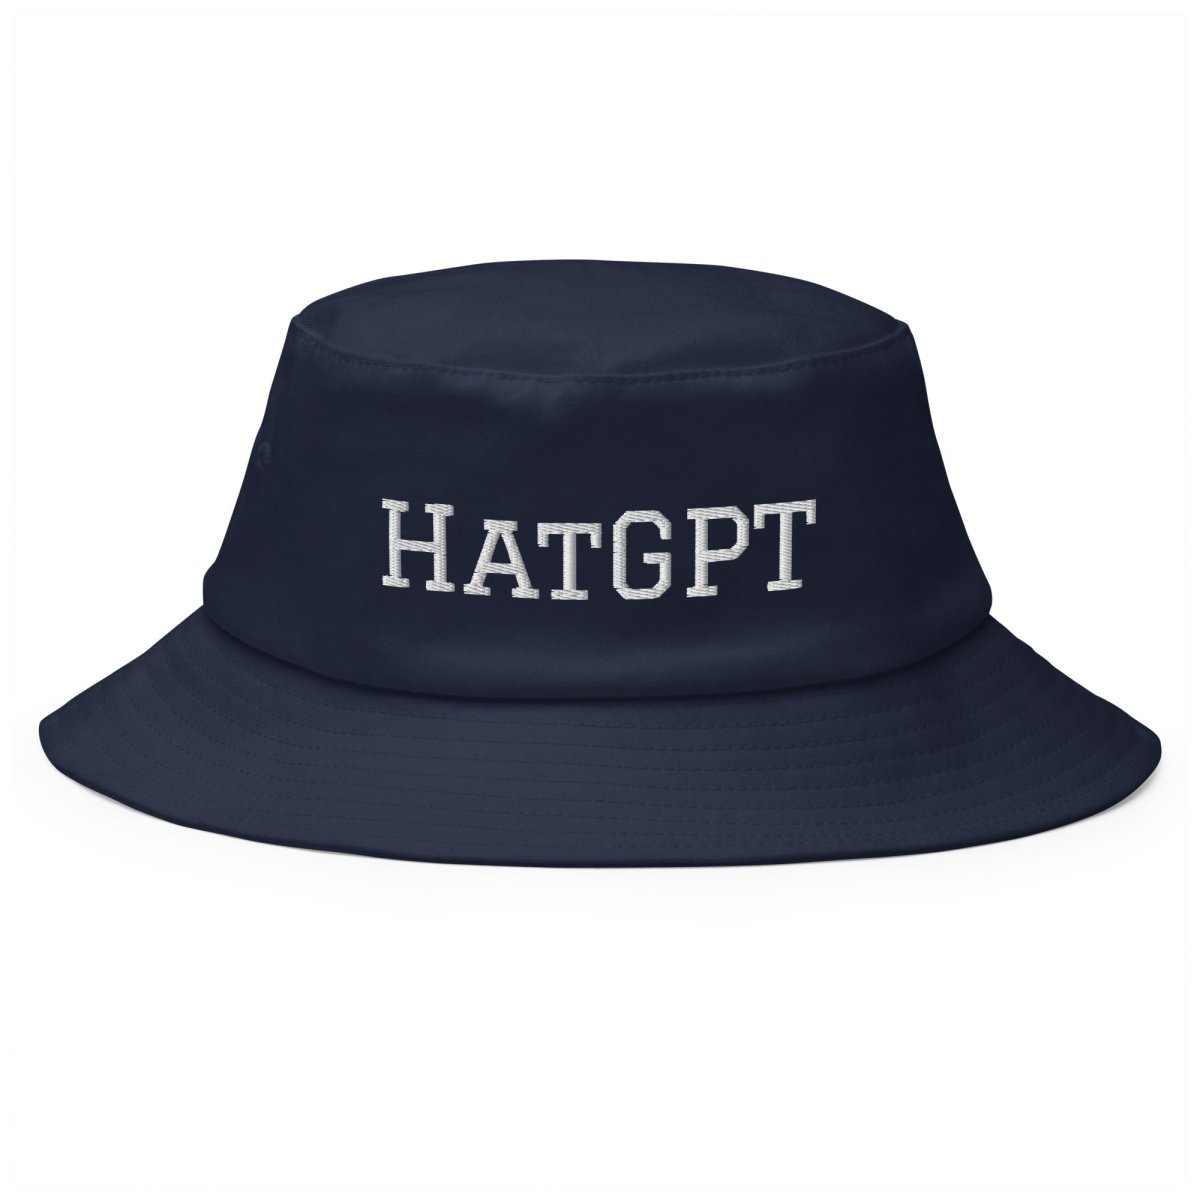 HatGPT Embroidered Bucket Hat - Navy - AI Store